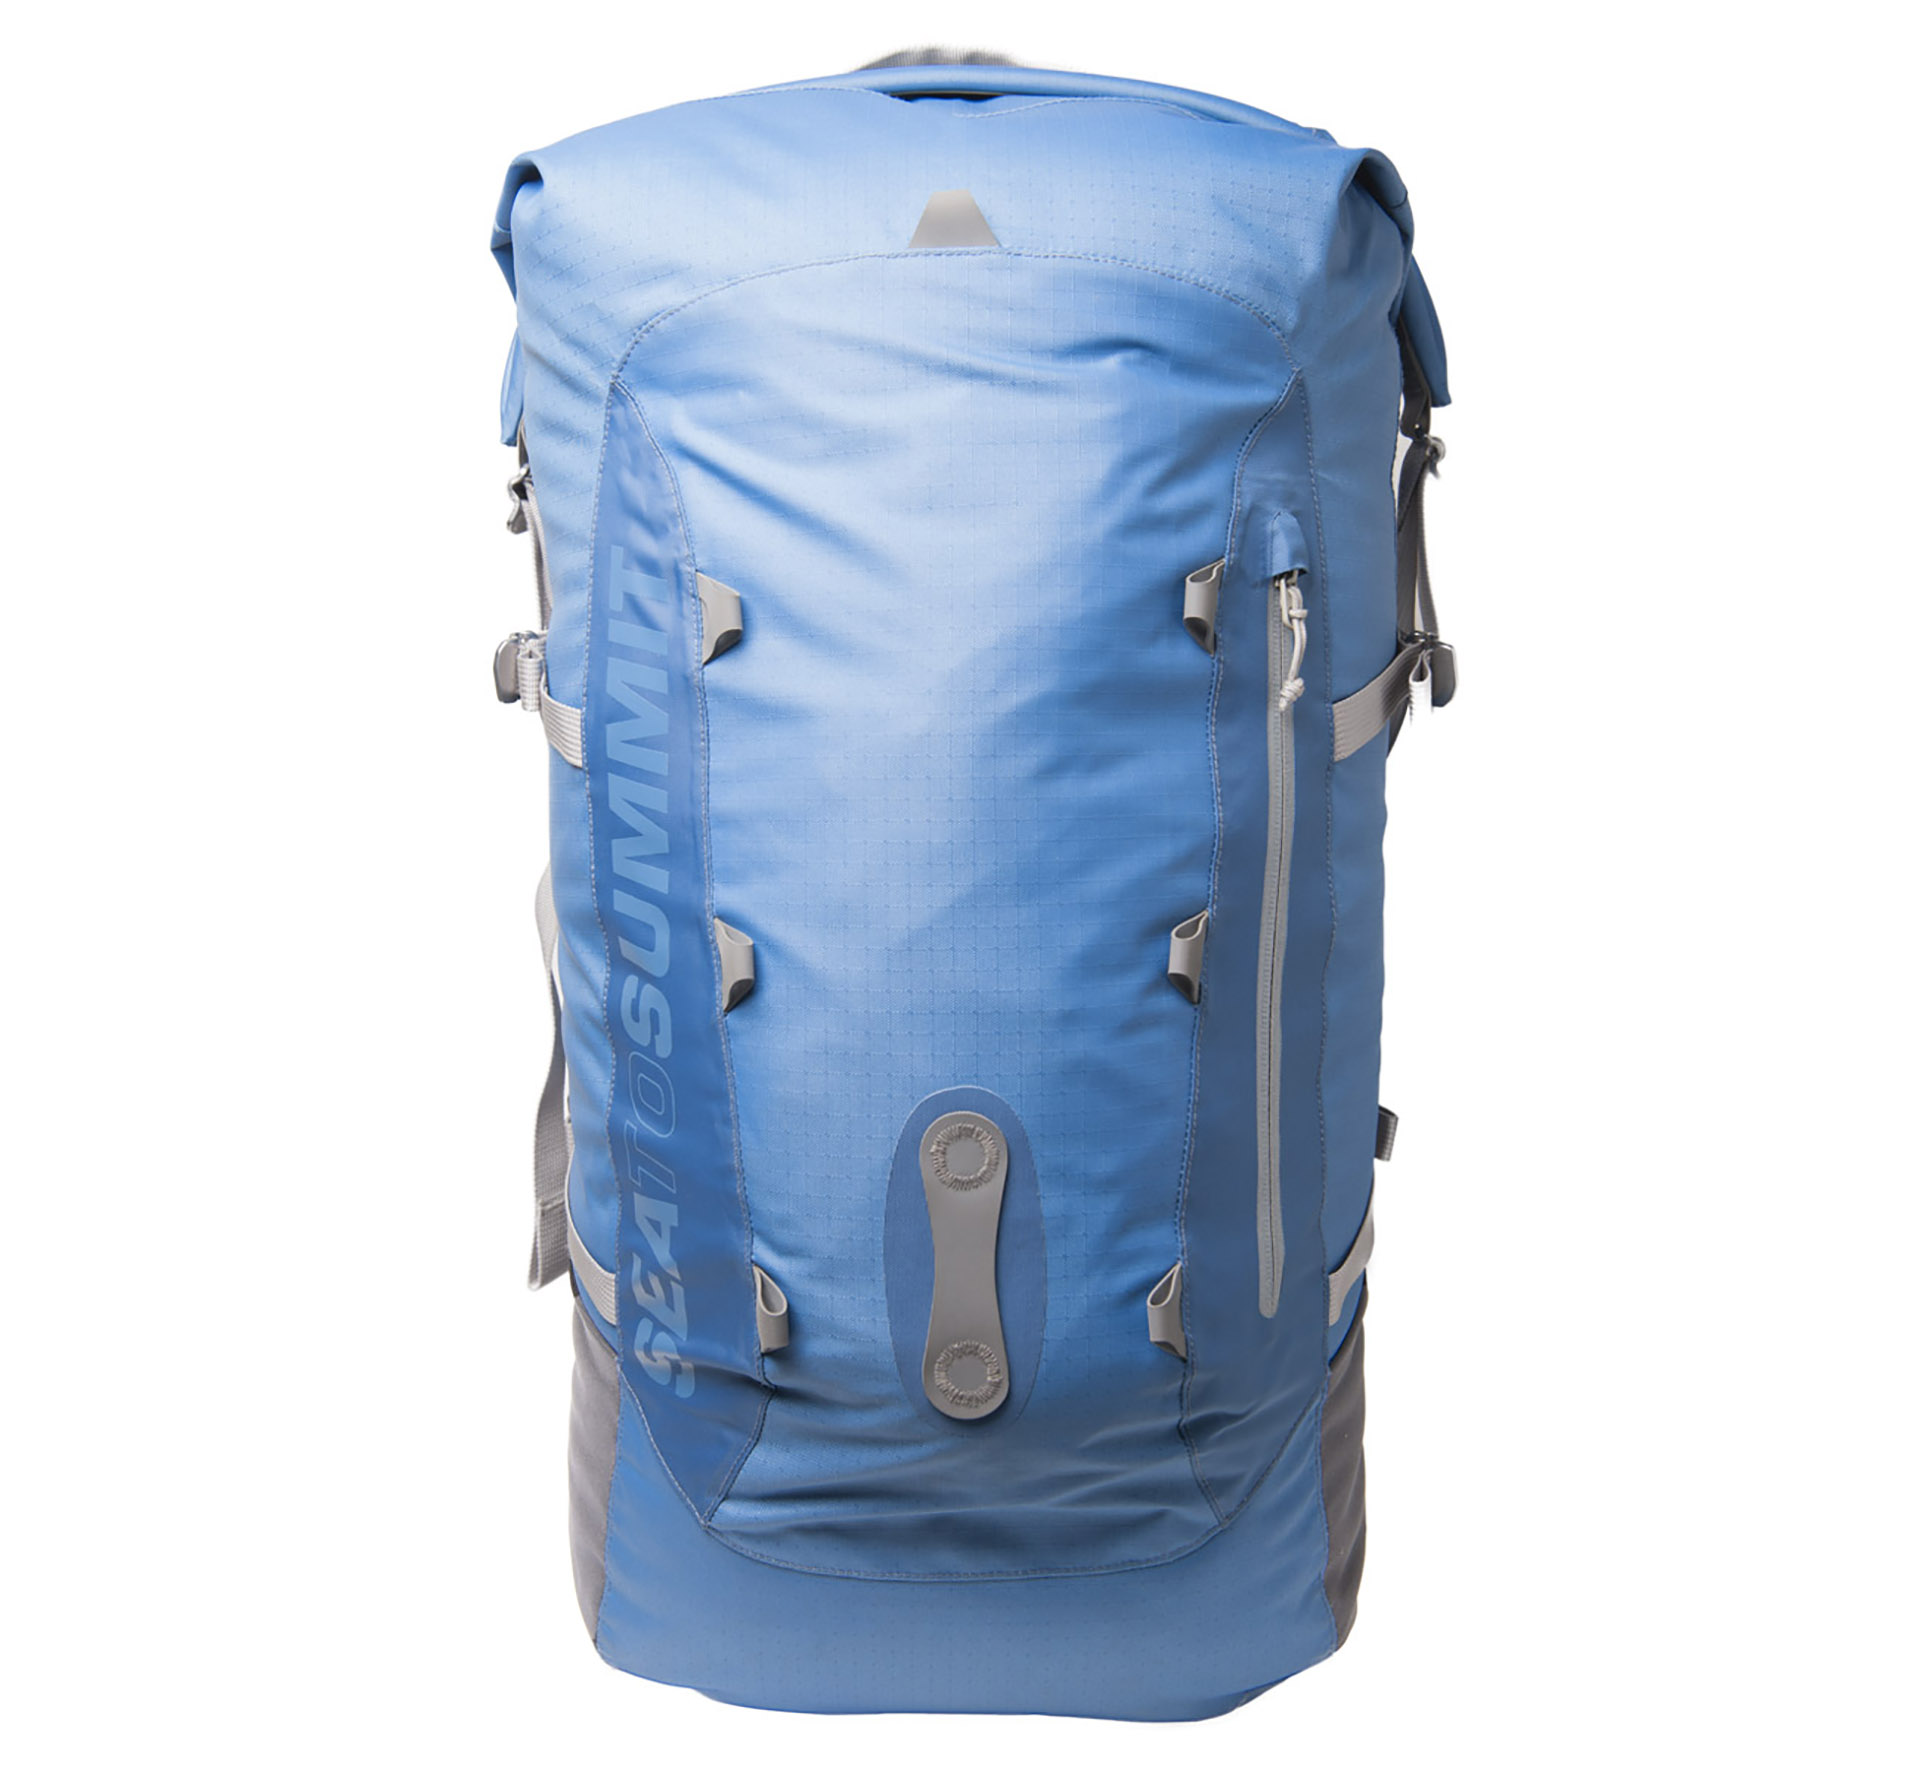 Sea to Summit, Flow 35L Dry Pack [Paddling Buyer's Guide]